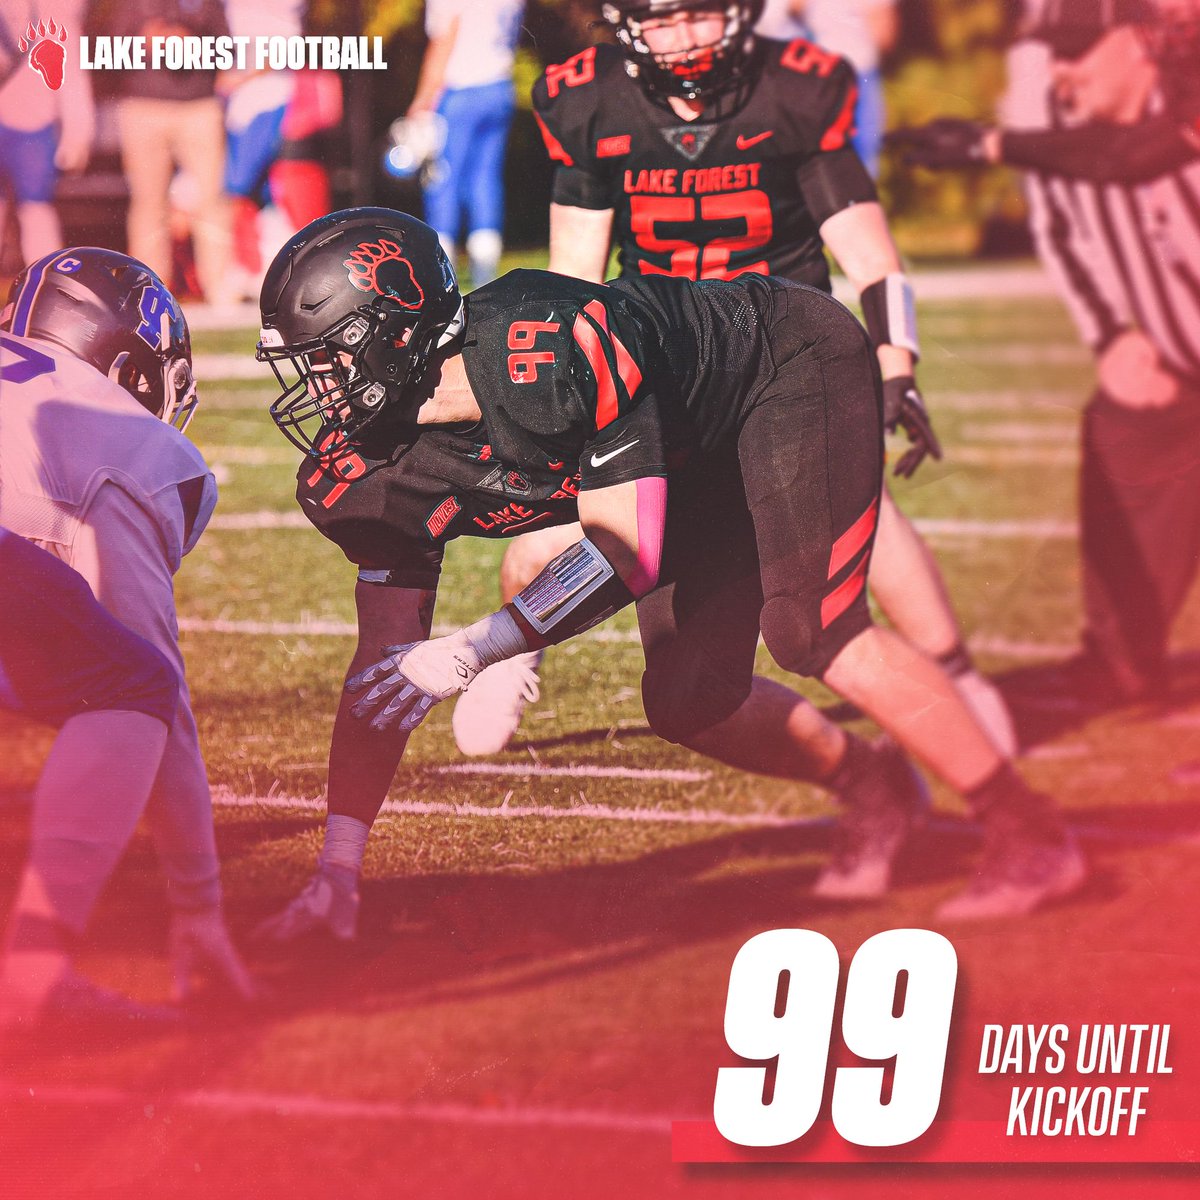 99 days until kickoff! Game day! #GoForesters #ForesterFamily #ForestFreaks #D3Football